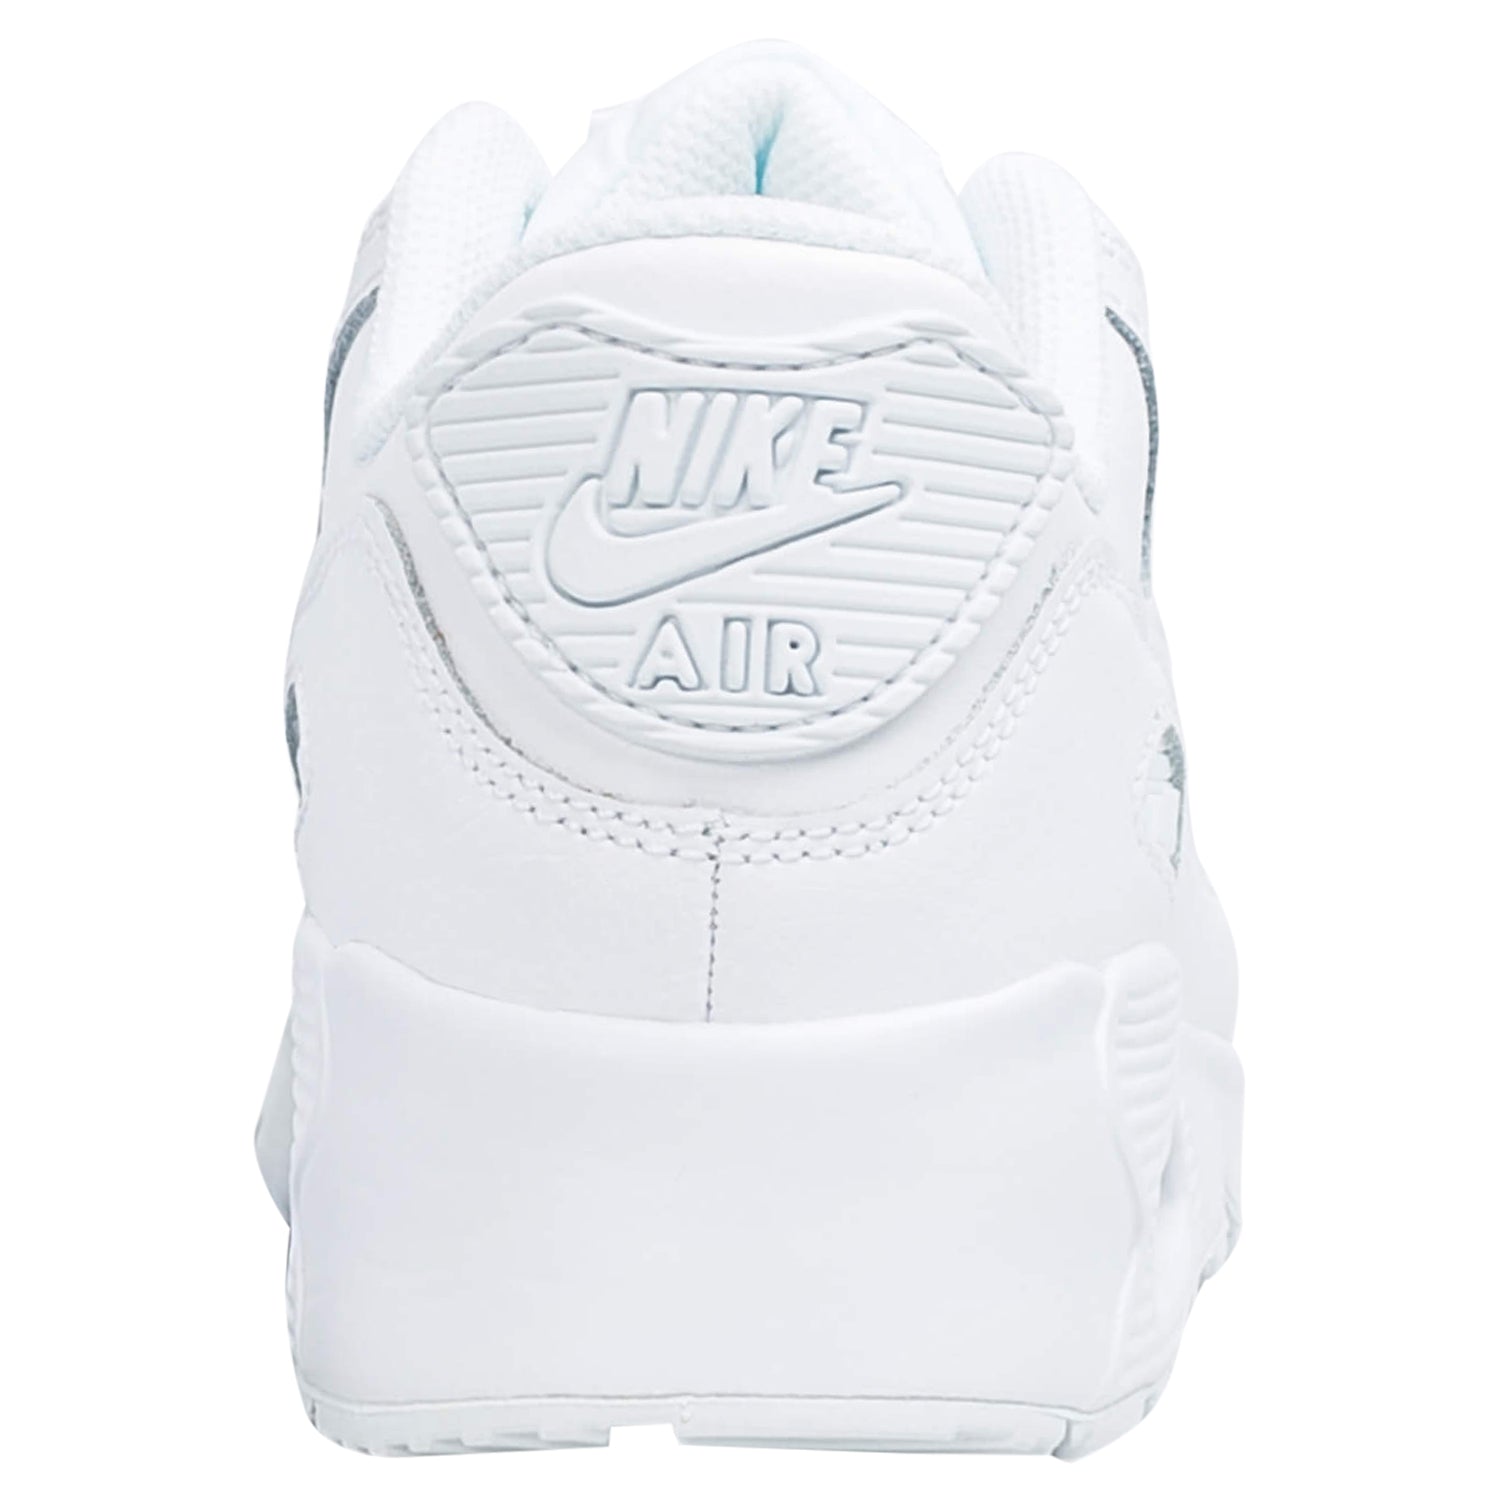 Nike Air Max 90 LTR (PS) Shoes White/White  Boys / Girls Style :833414